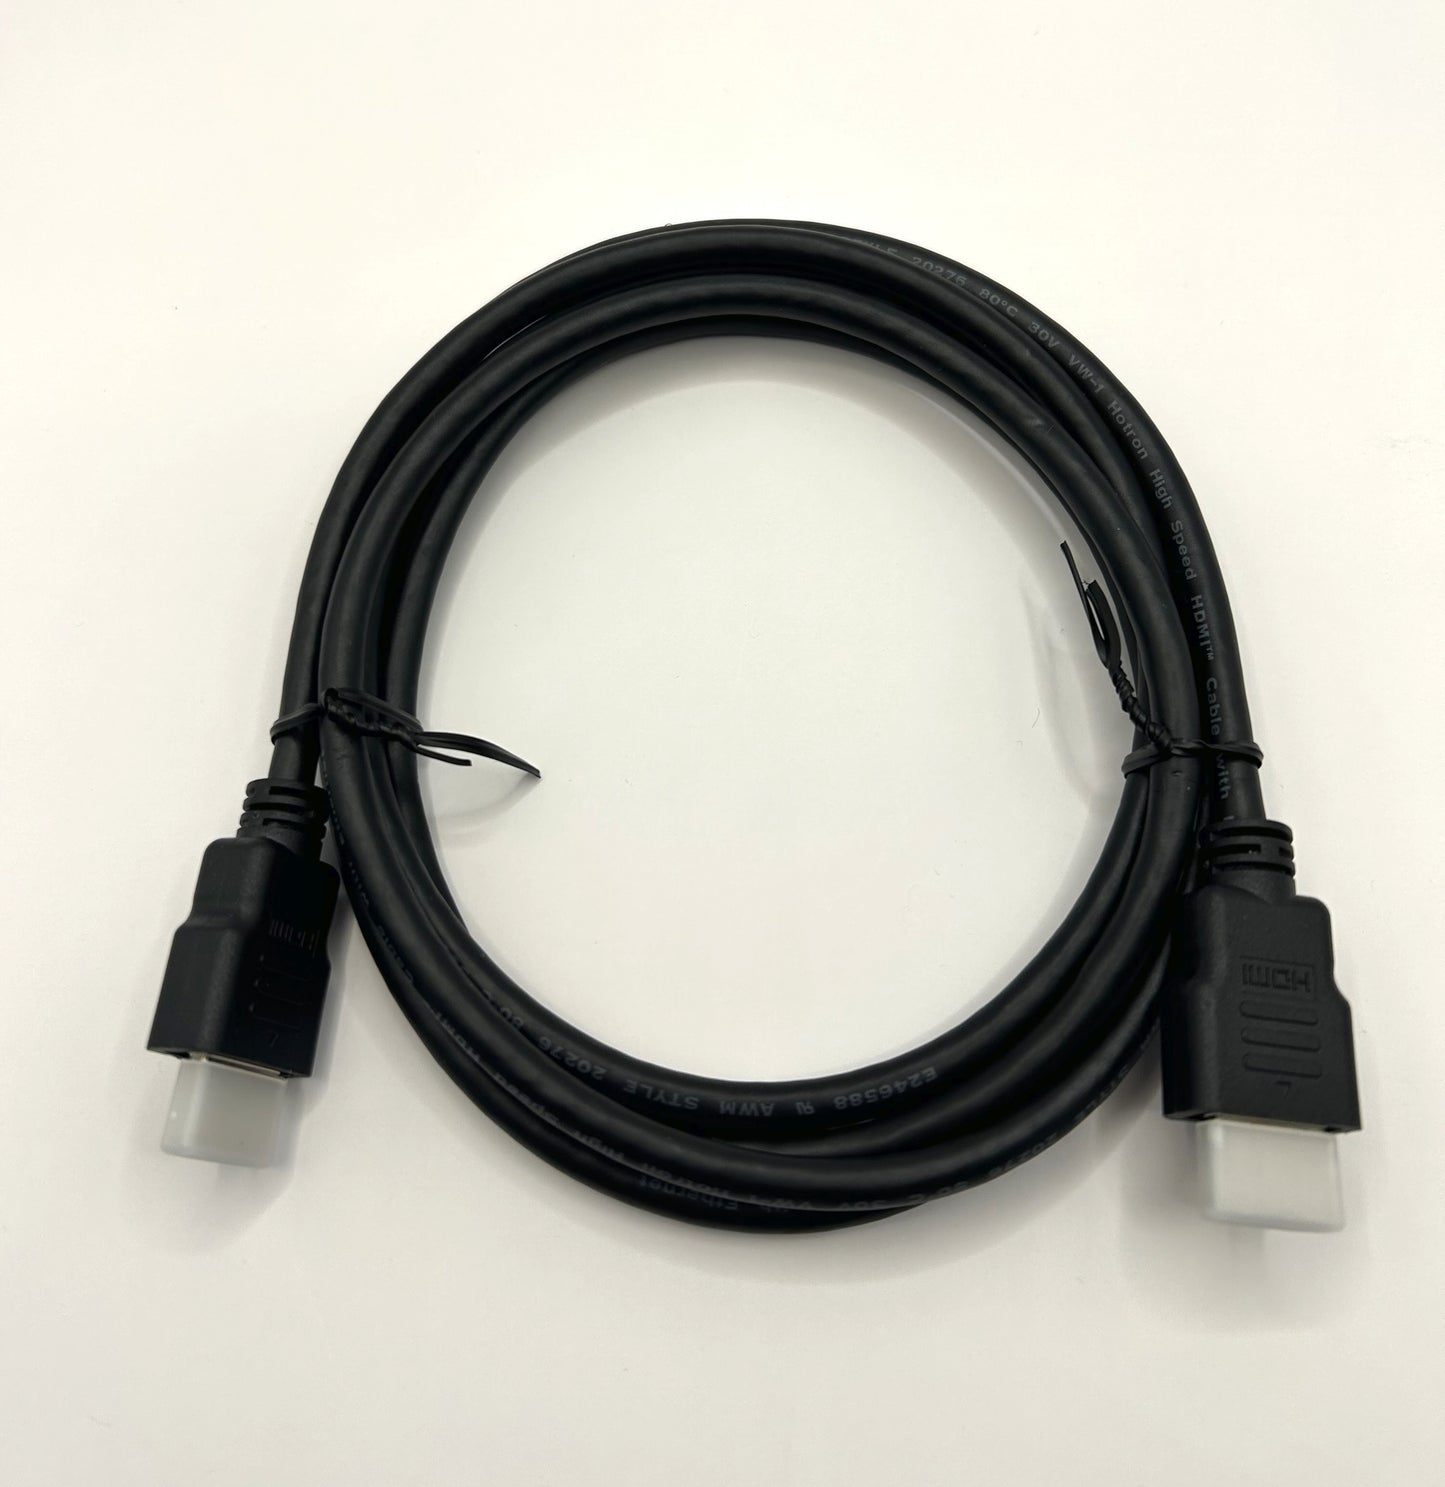 1.8 Meter HDMI to HDMI Hight Speed with Ethernet Cable Premium Quality